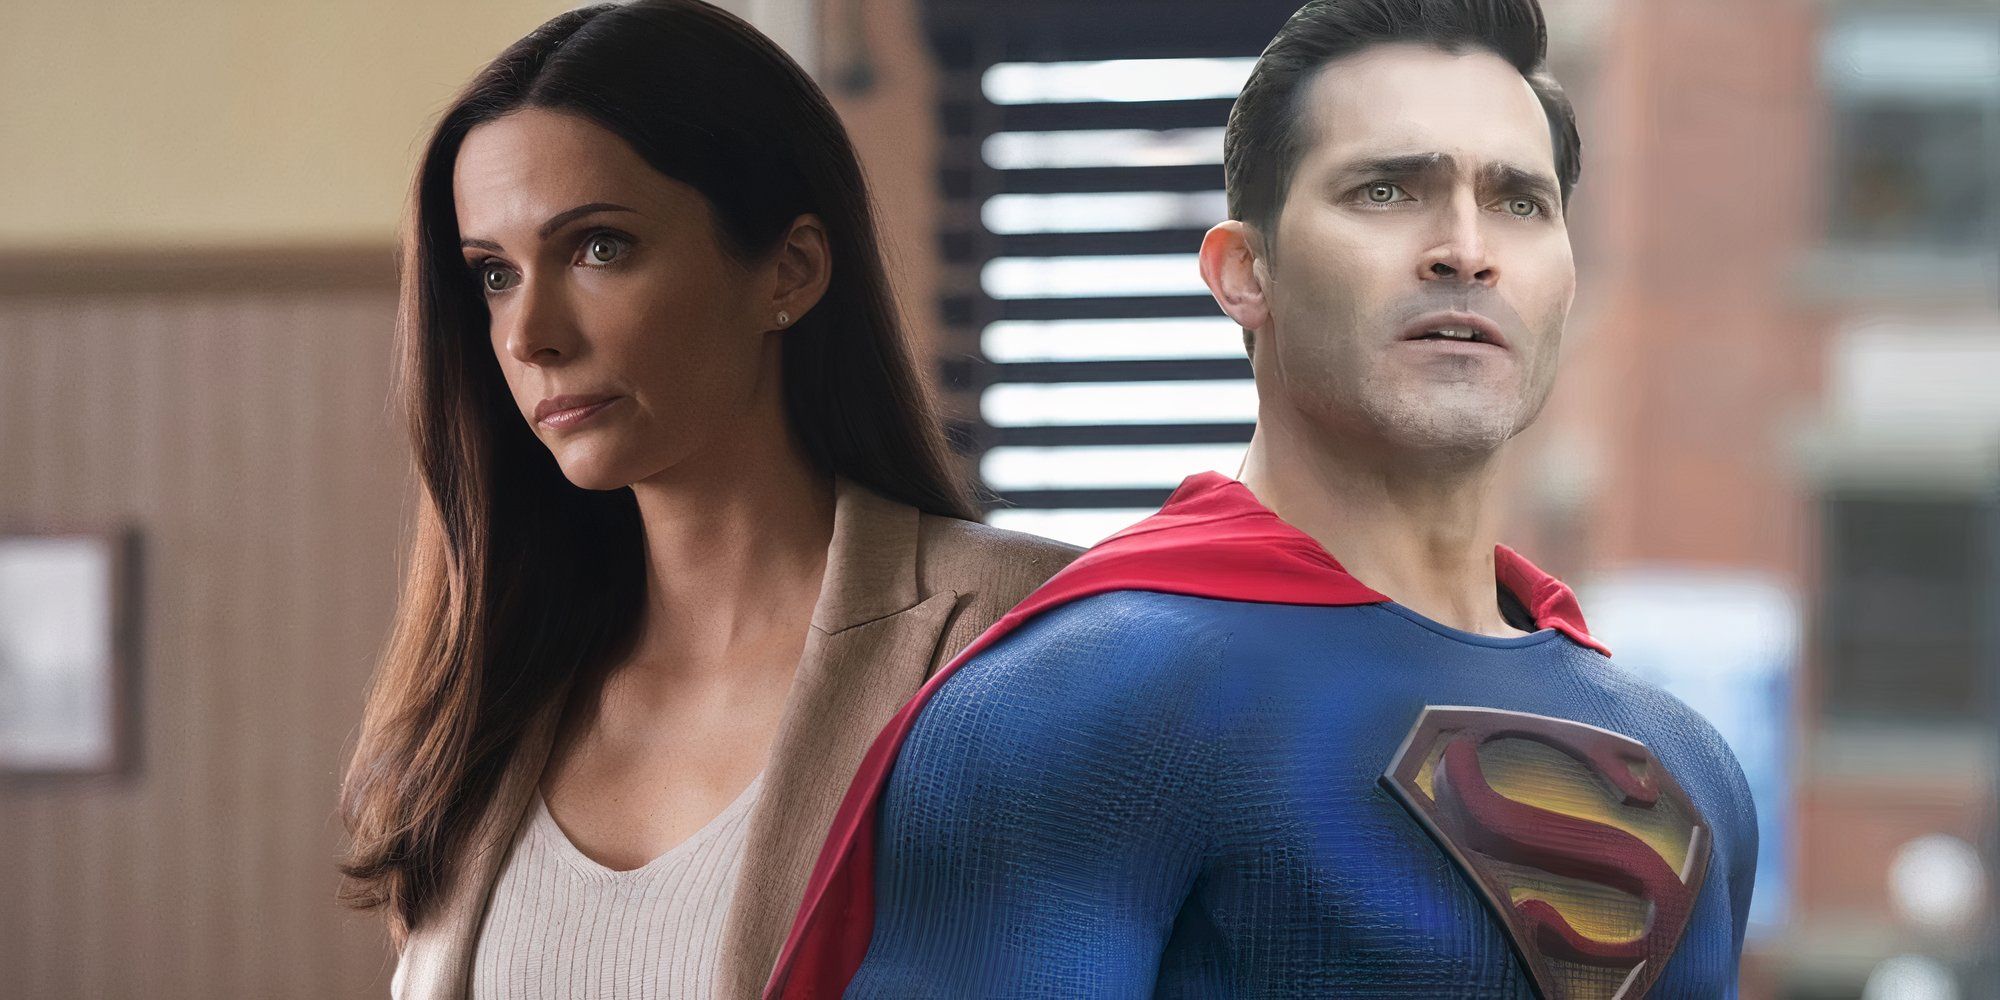 A split image of Lois and Clark from Superman and Lois CW TV show